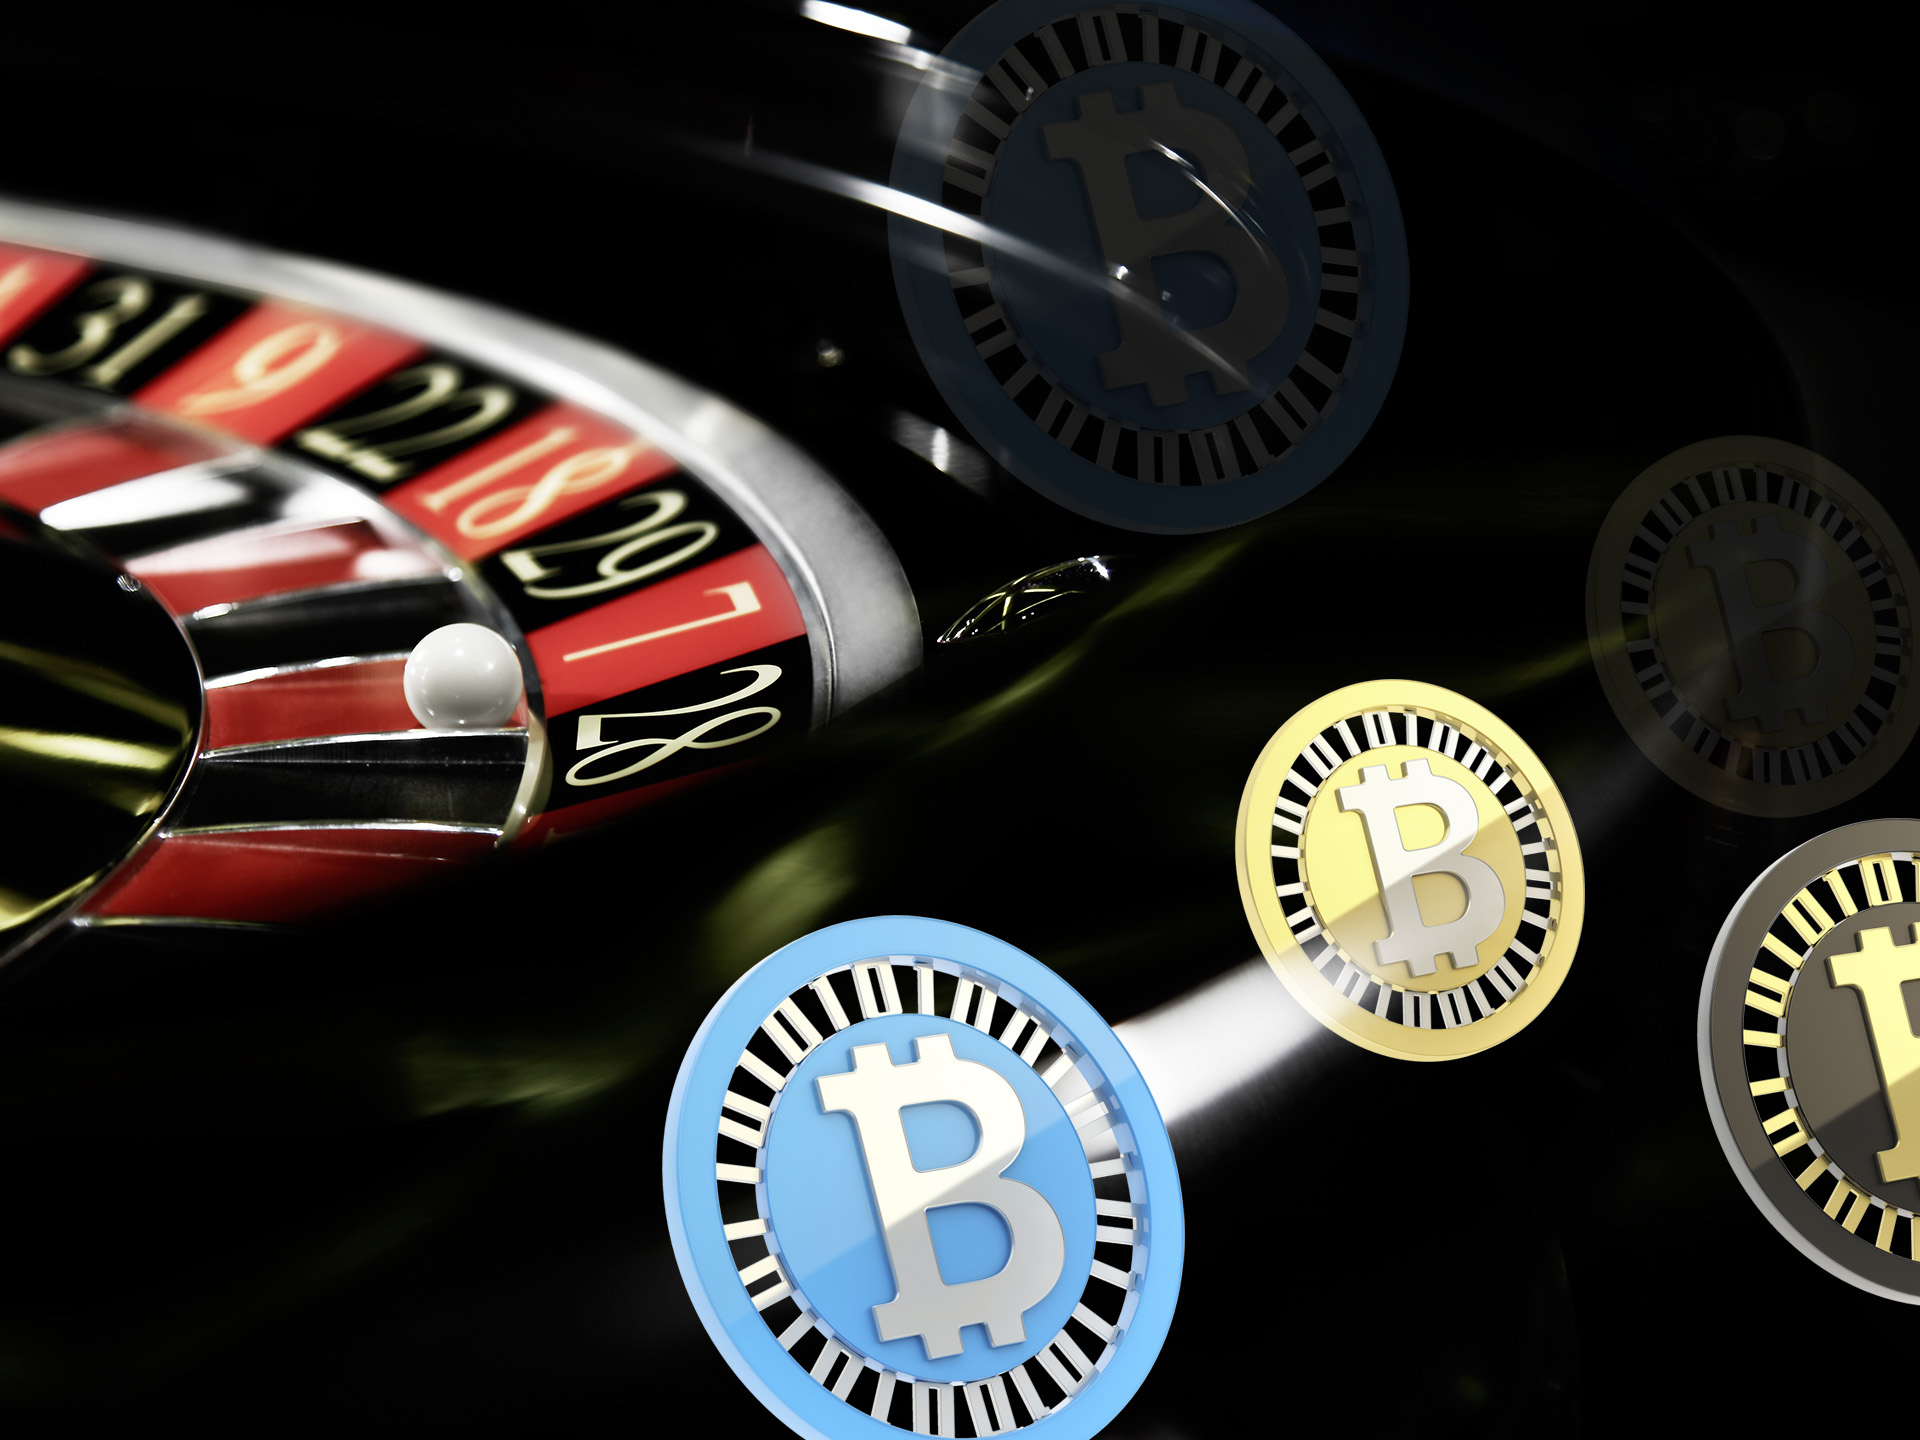 btc casino: Is Not That Difficult As You Think